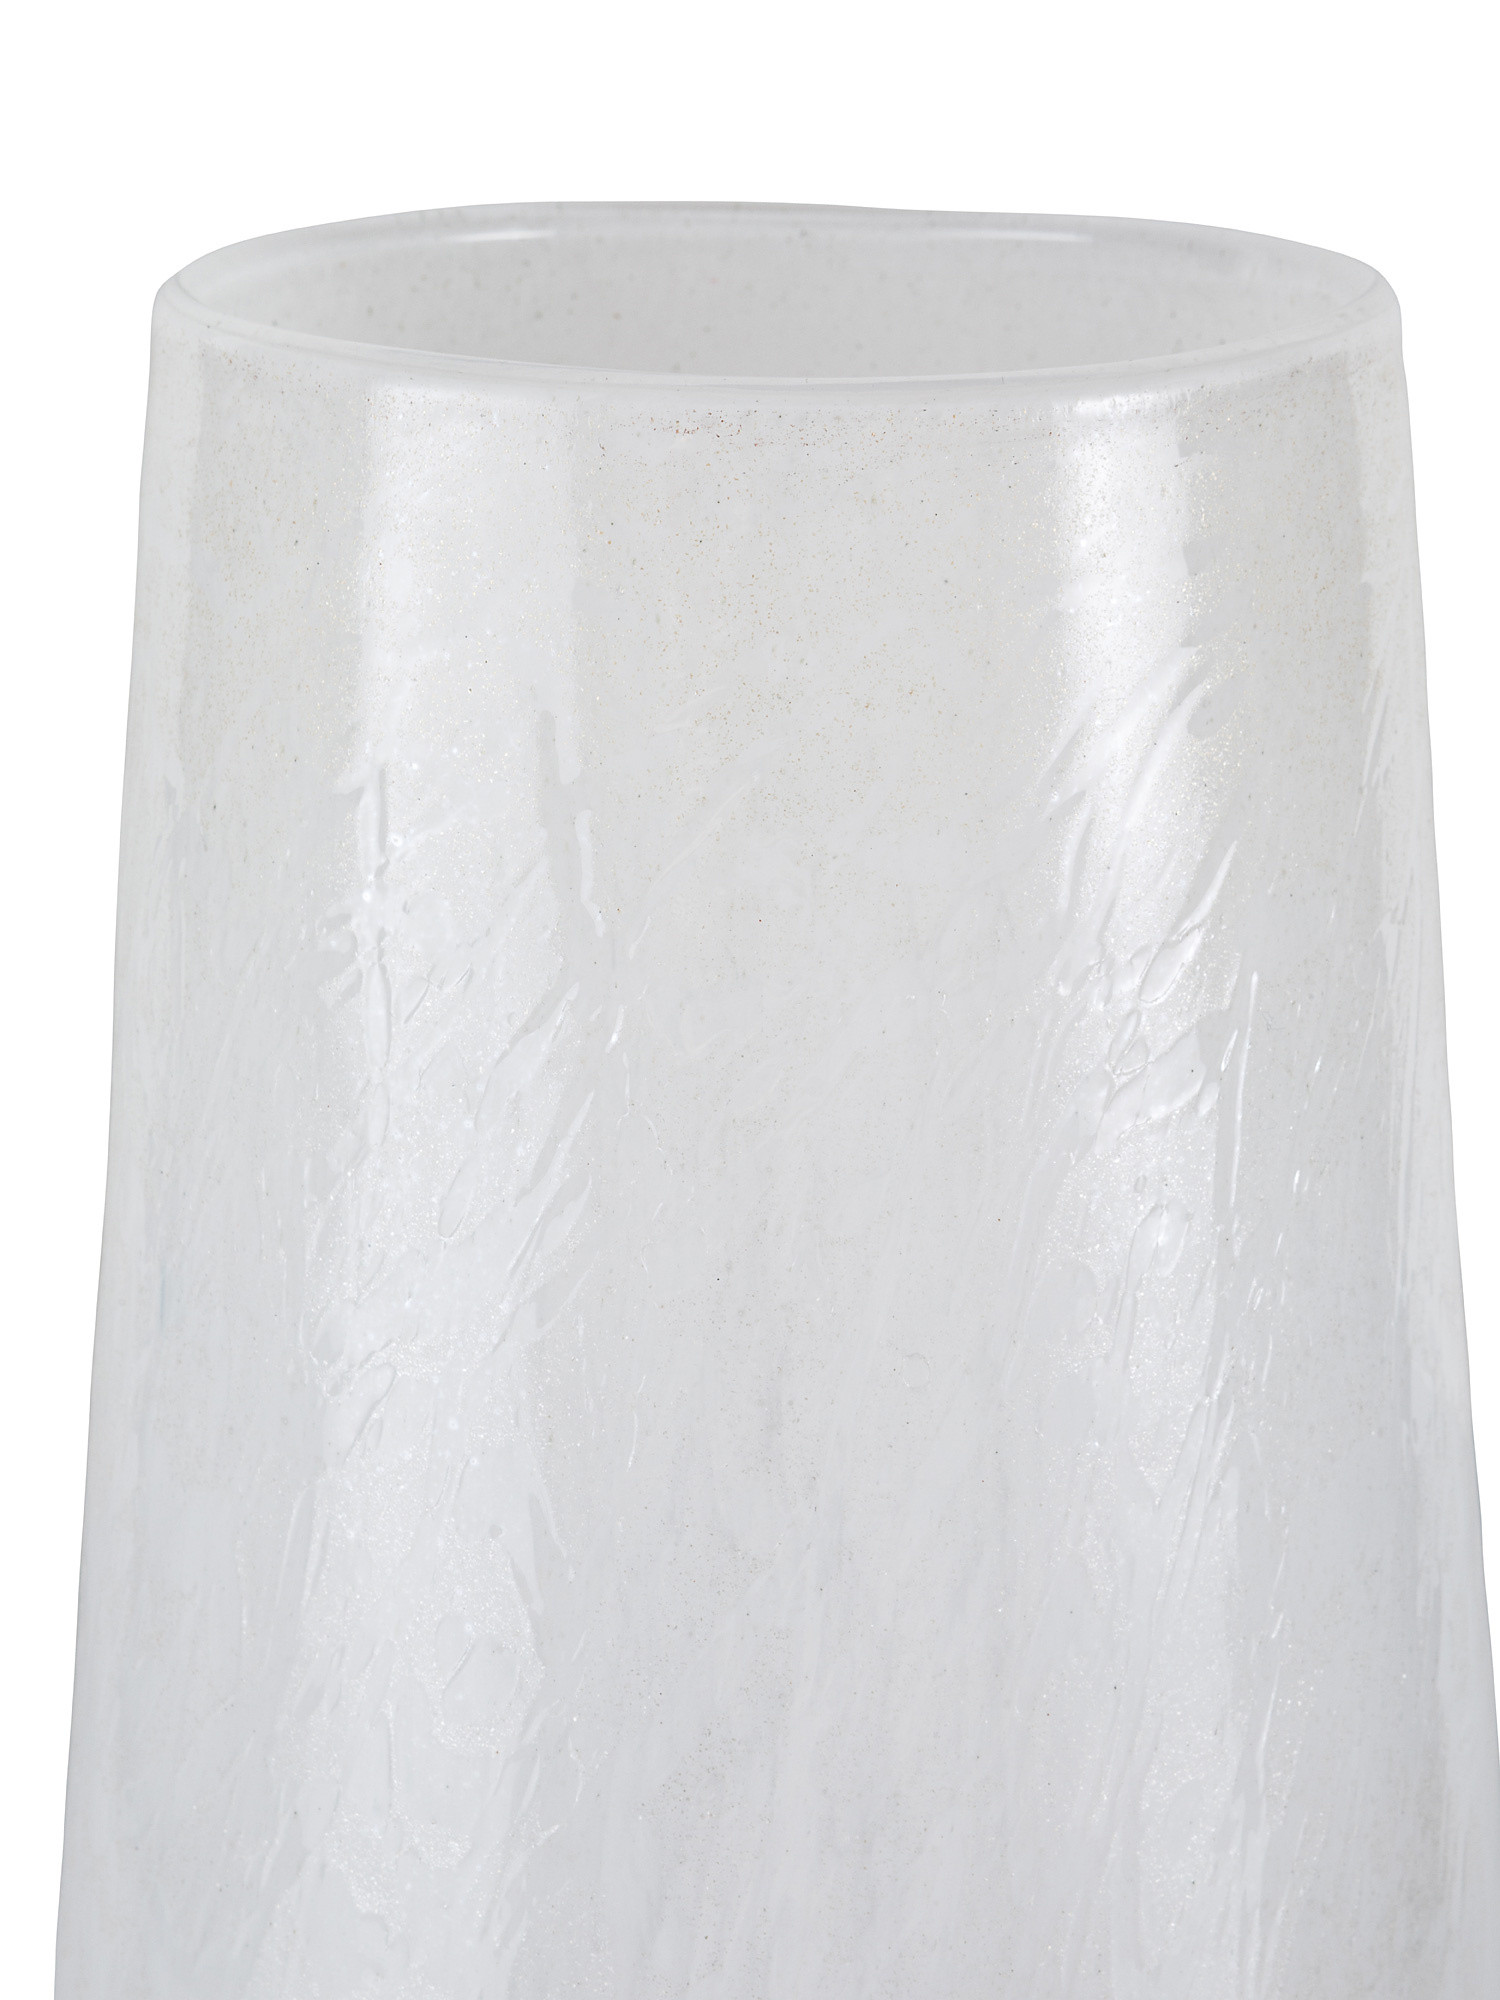 Colored paste glass vase, White, large image number 1